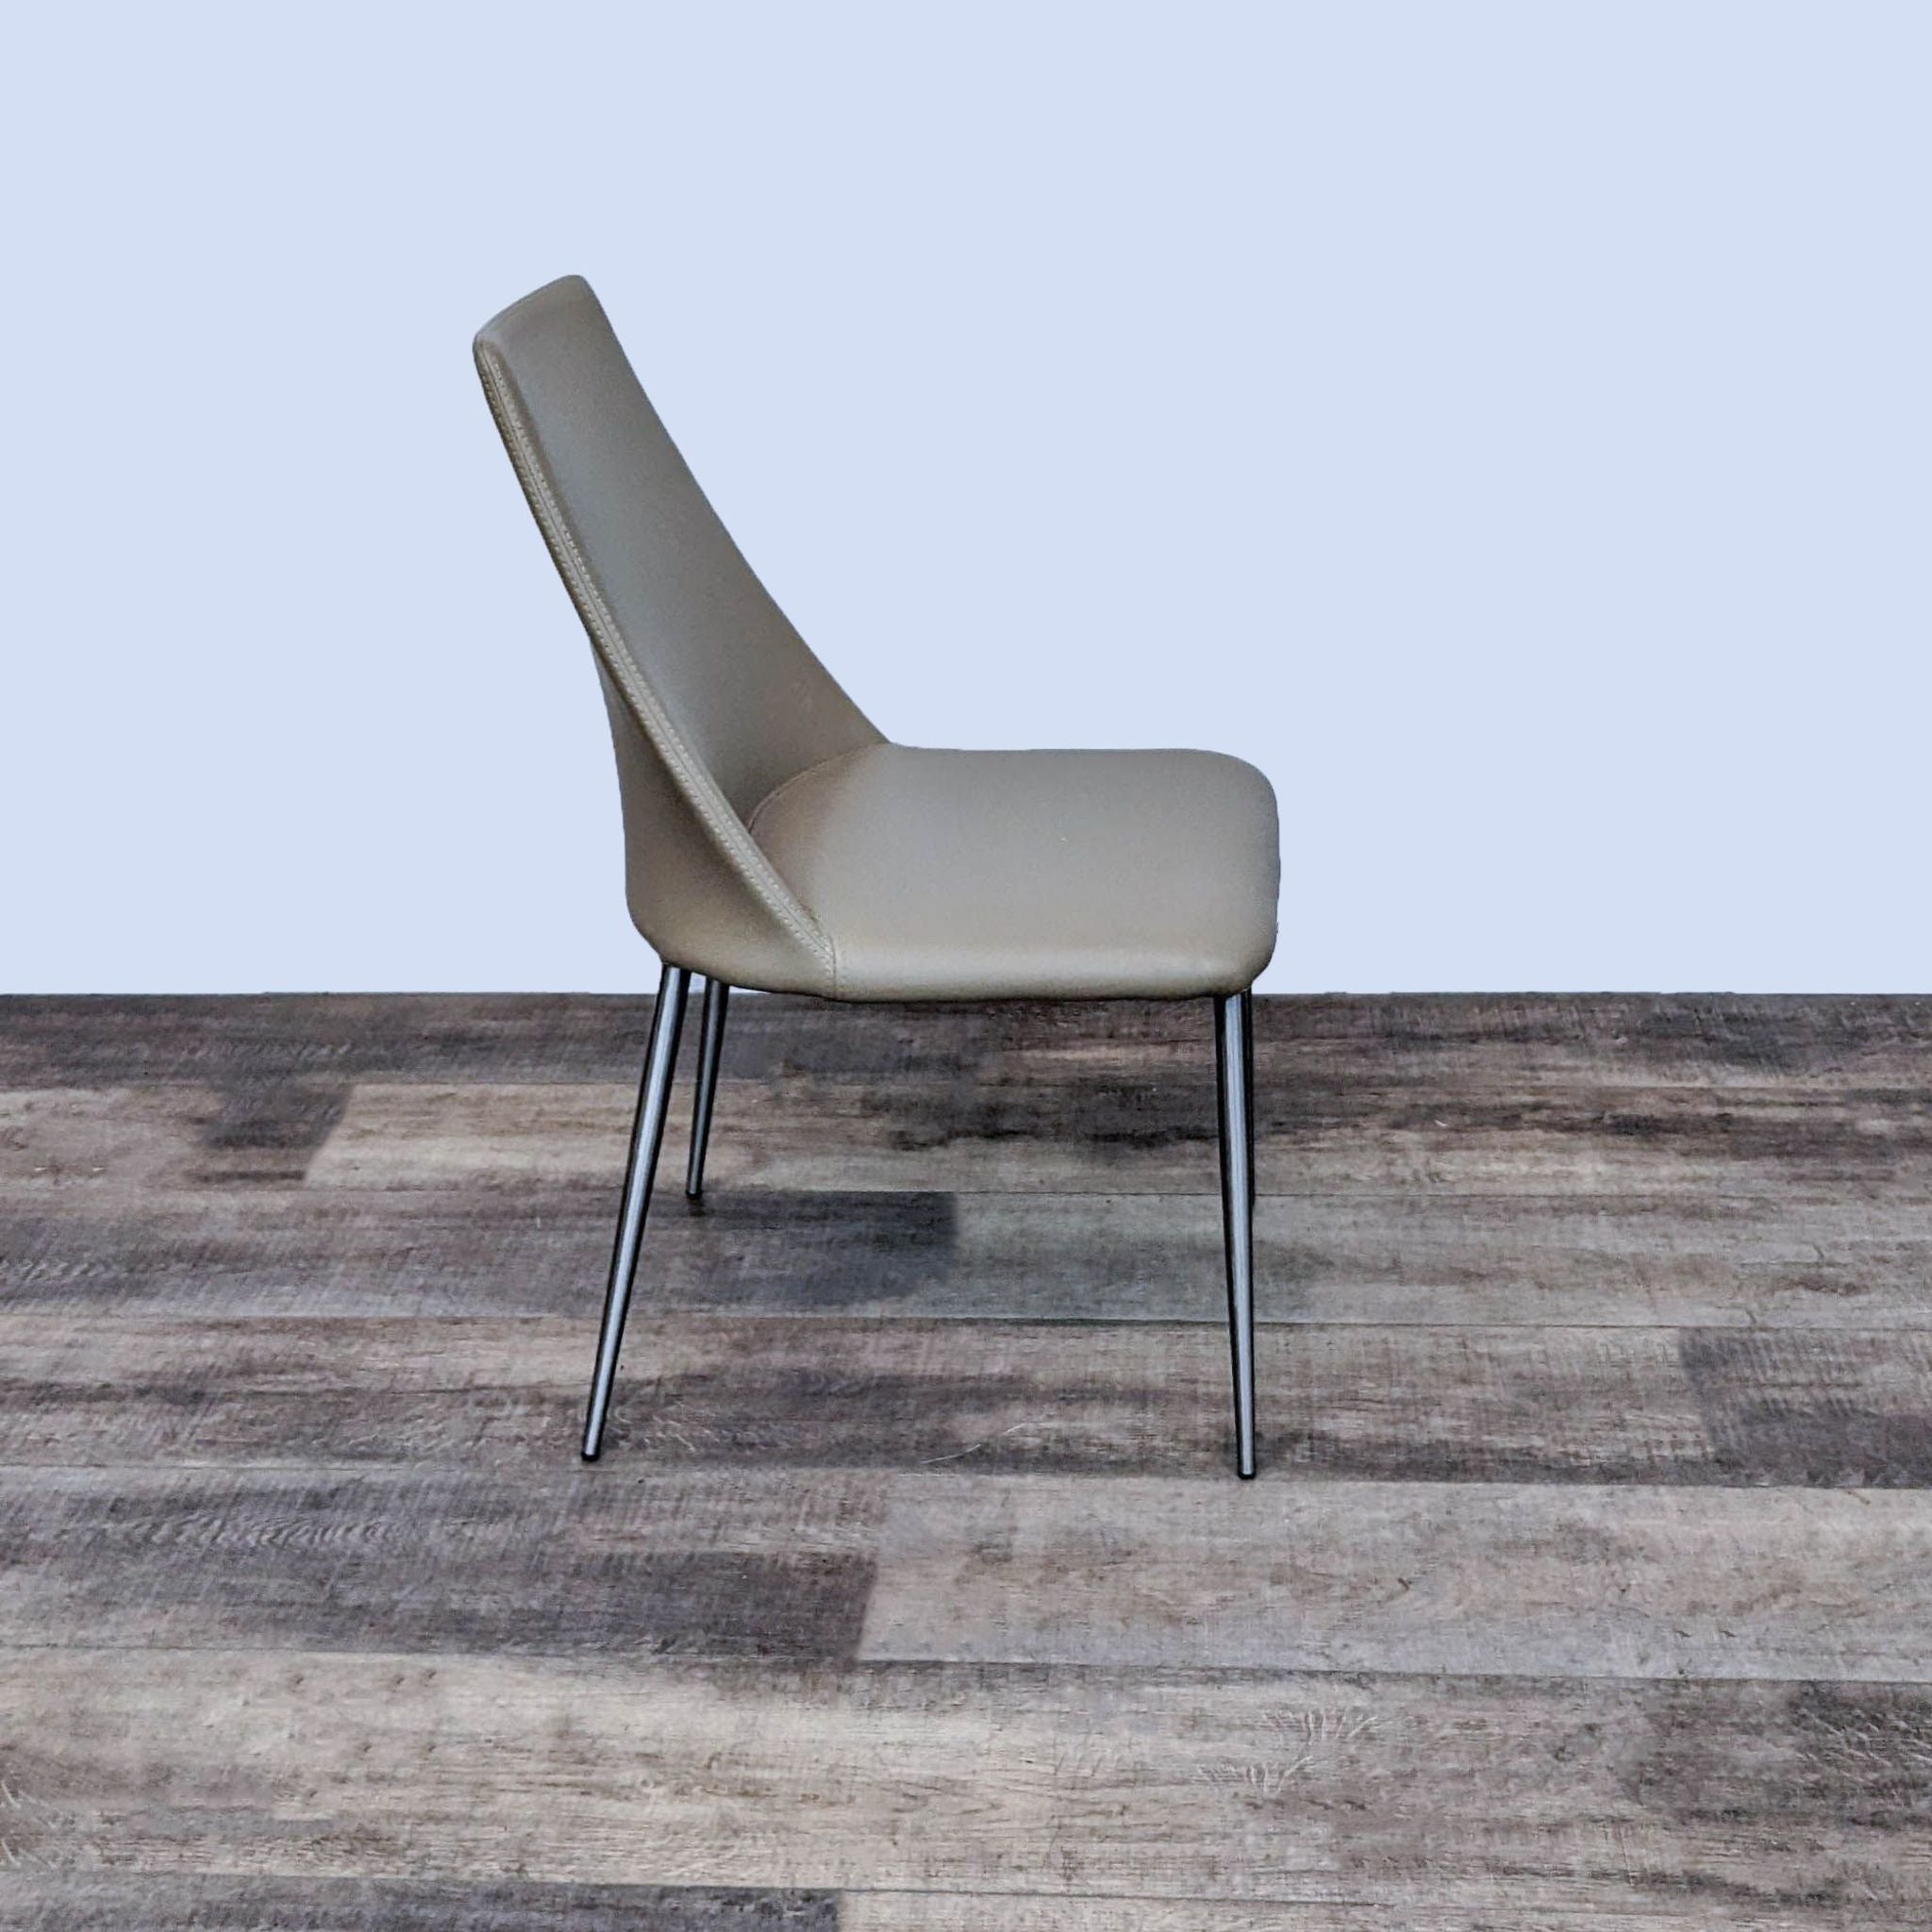 Alt text 2: Side view of a Zuo Modern Whisp dining chair showcasing its wingback style and sleek chrome legs on a wooden floor.